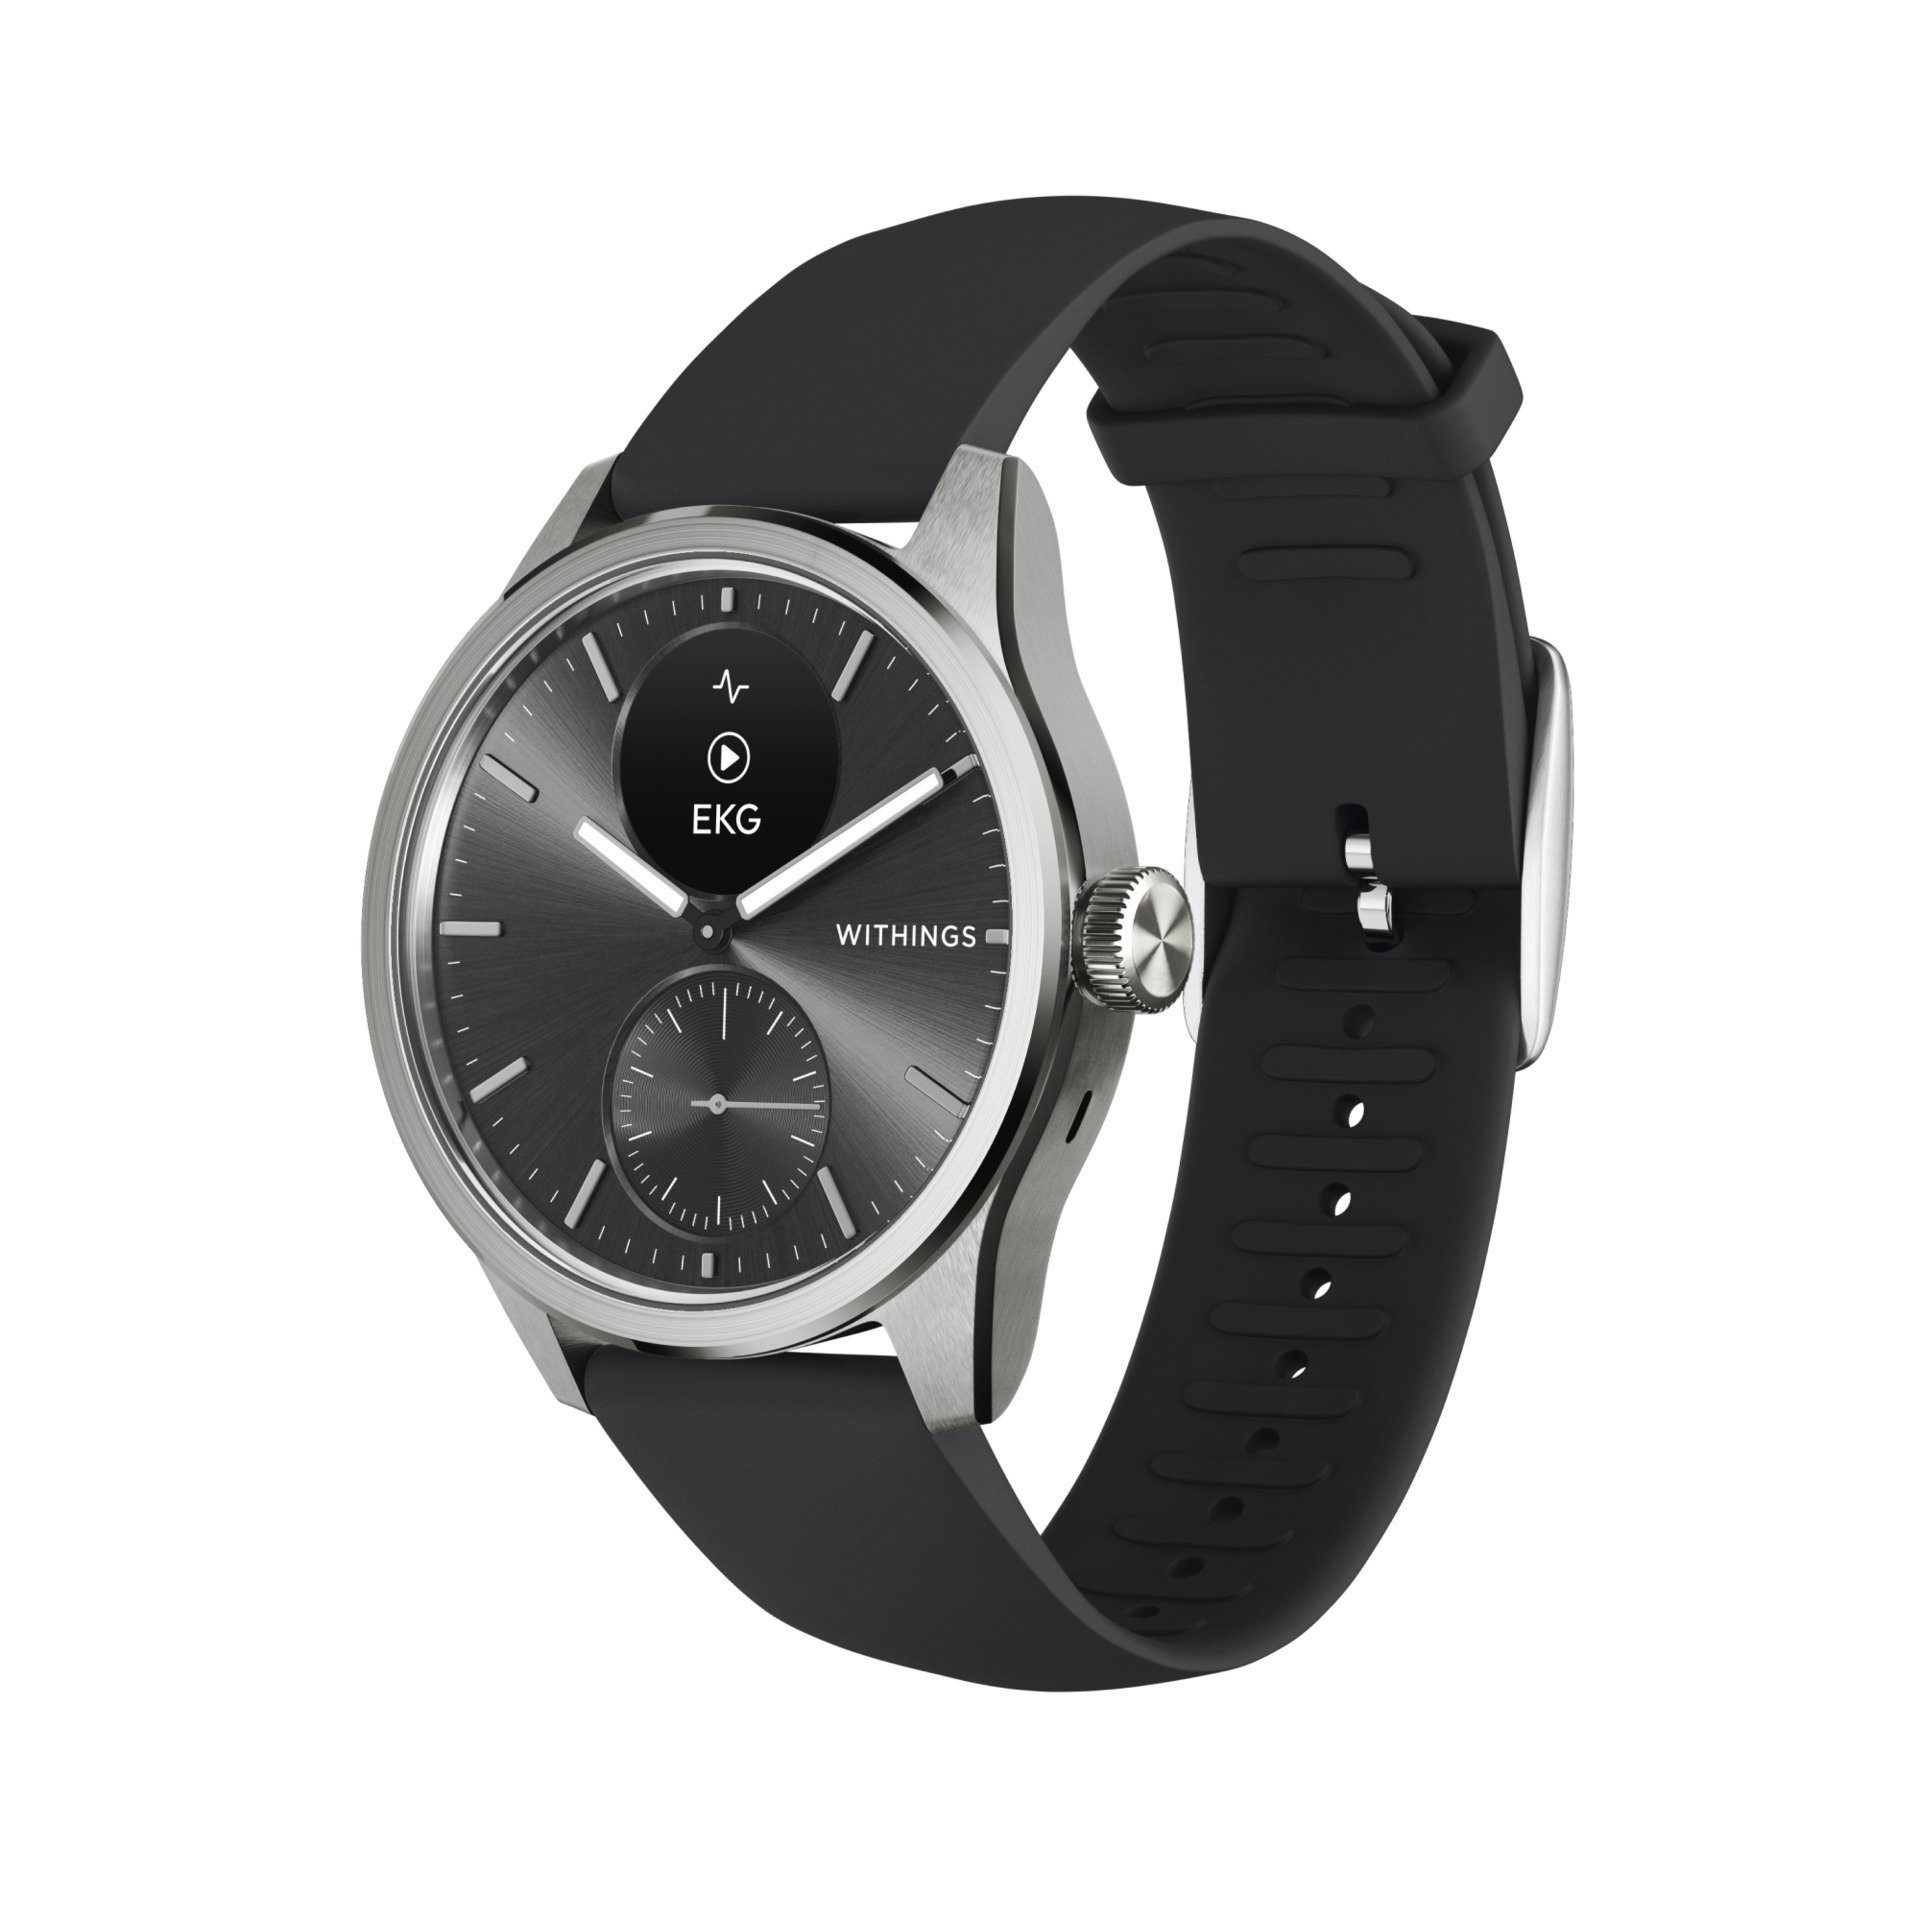 Smartwatch mm) cm/0,63 Withings (42 ScanWatch 2 Zoll) (1,6